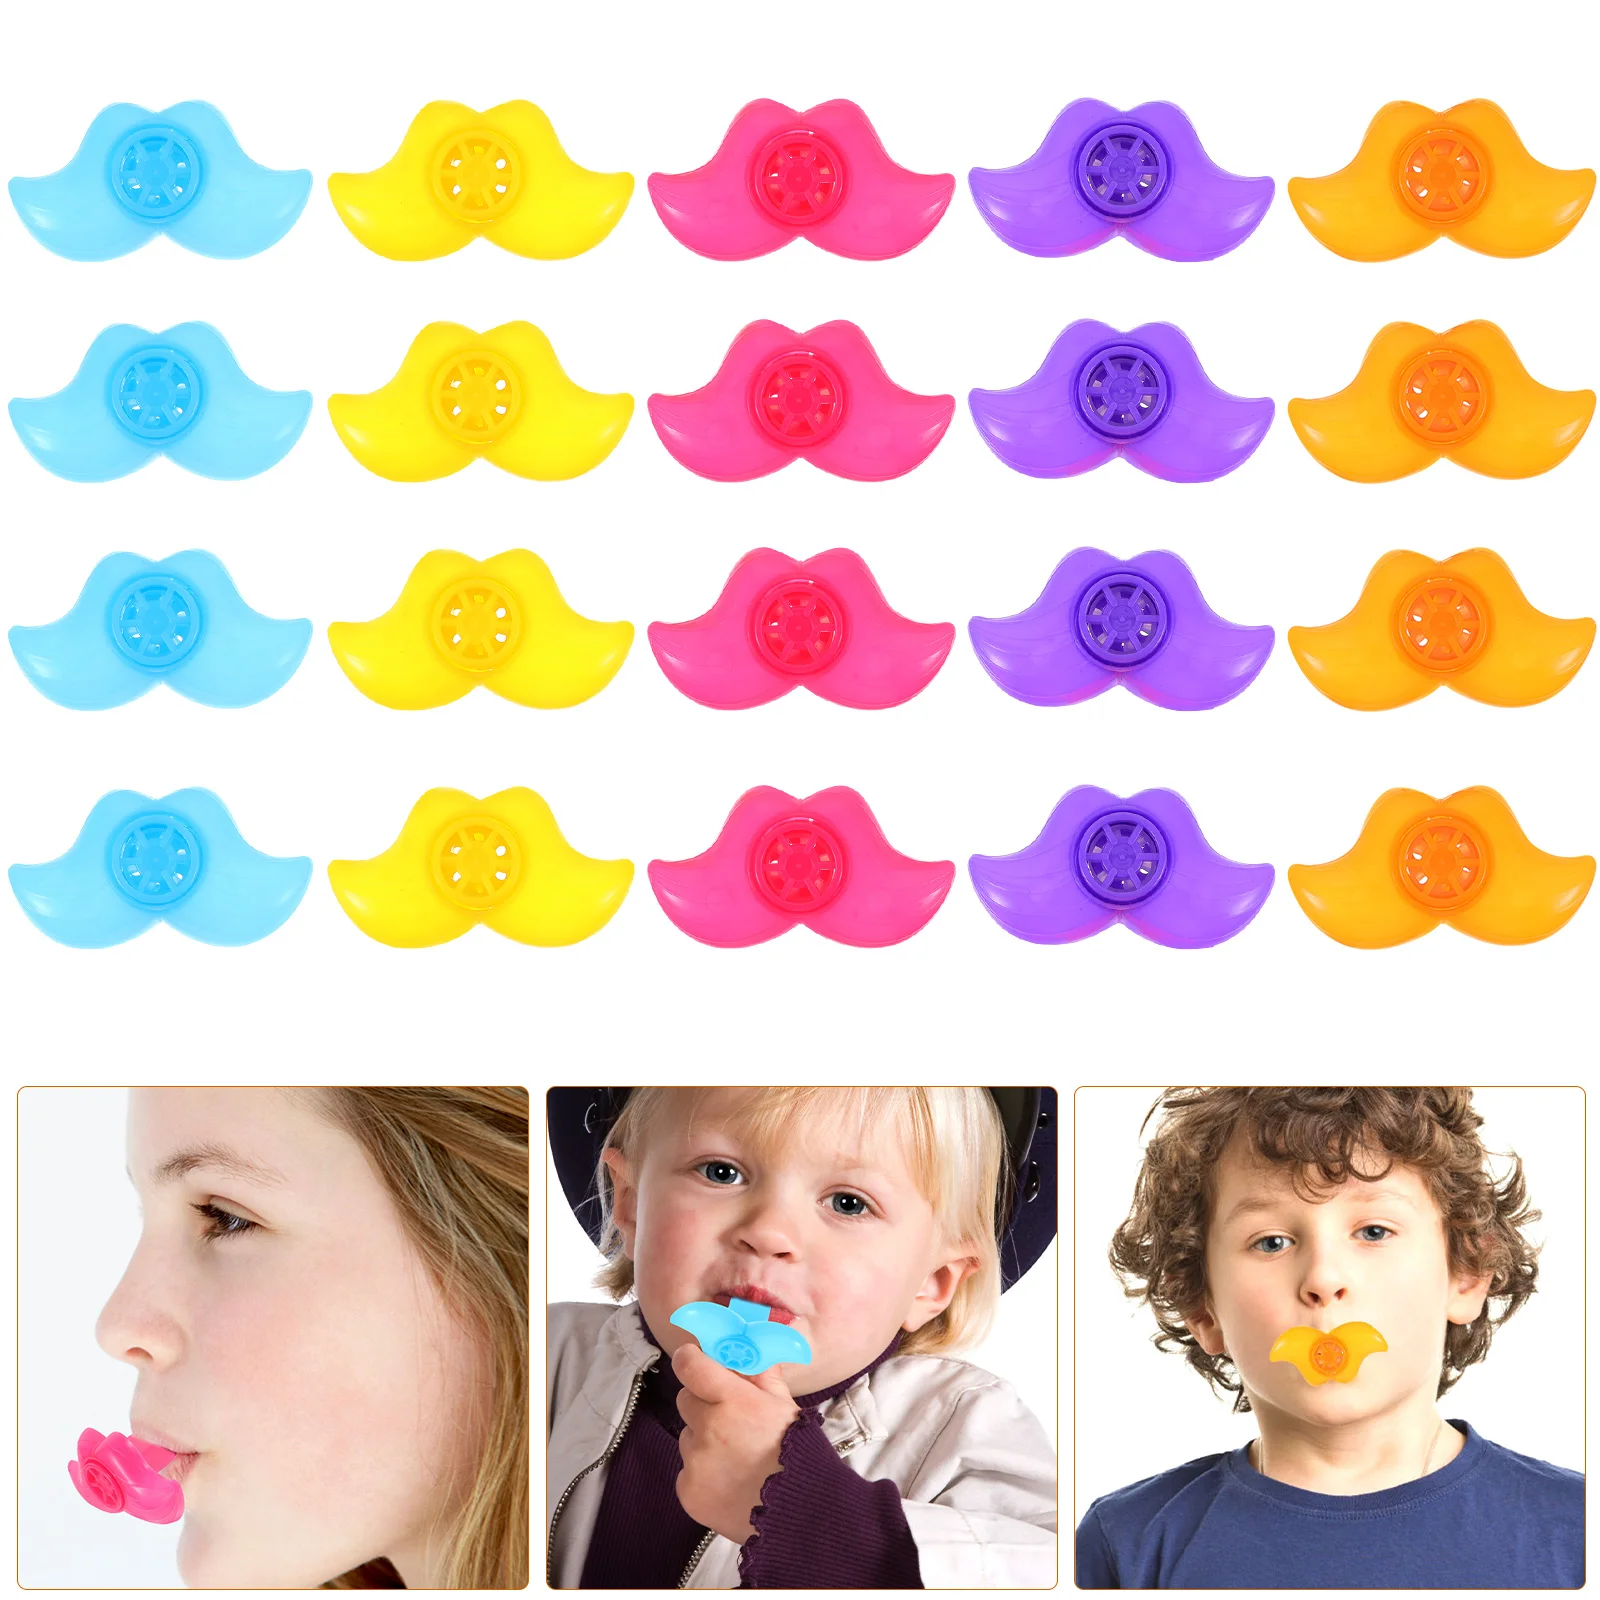 

20 Pcs Children's Whistle Toy Toys Party Creative Noise Makers Gift Kids Whistles Cheering Pp Cartoon Blowers Holiday Sports